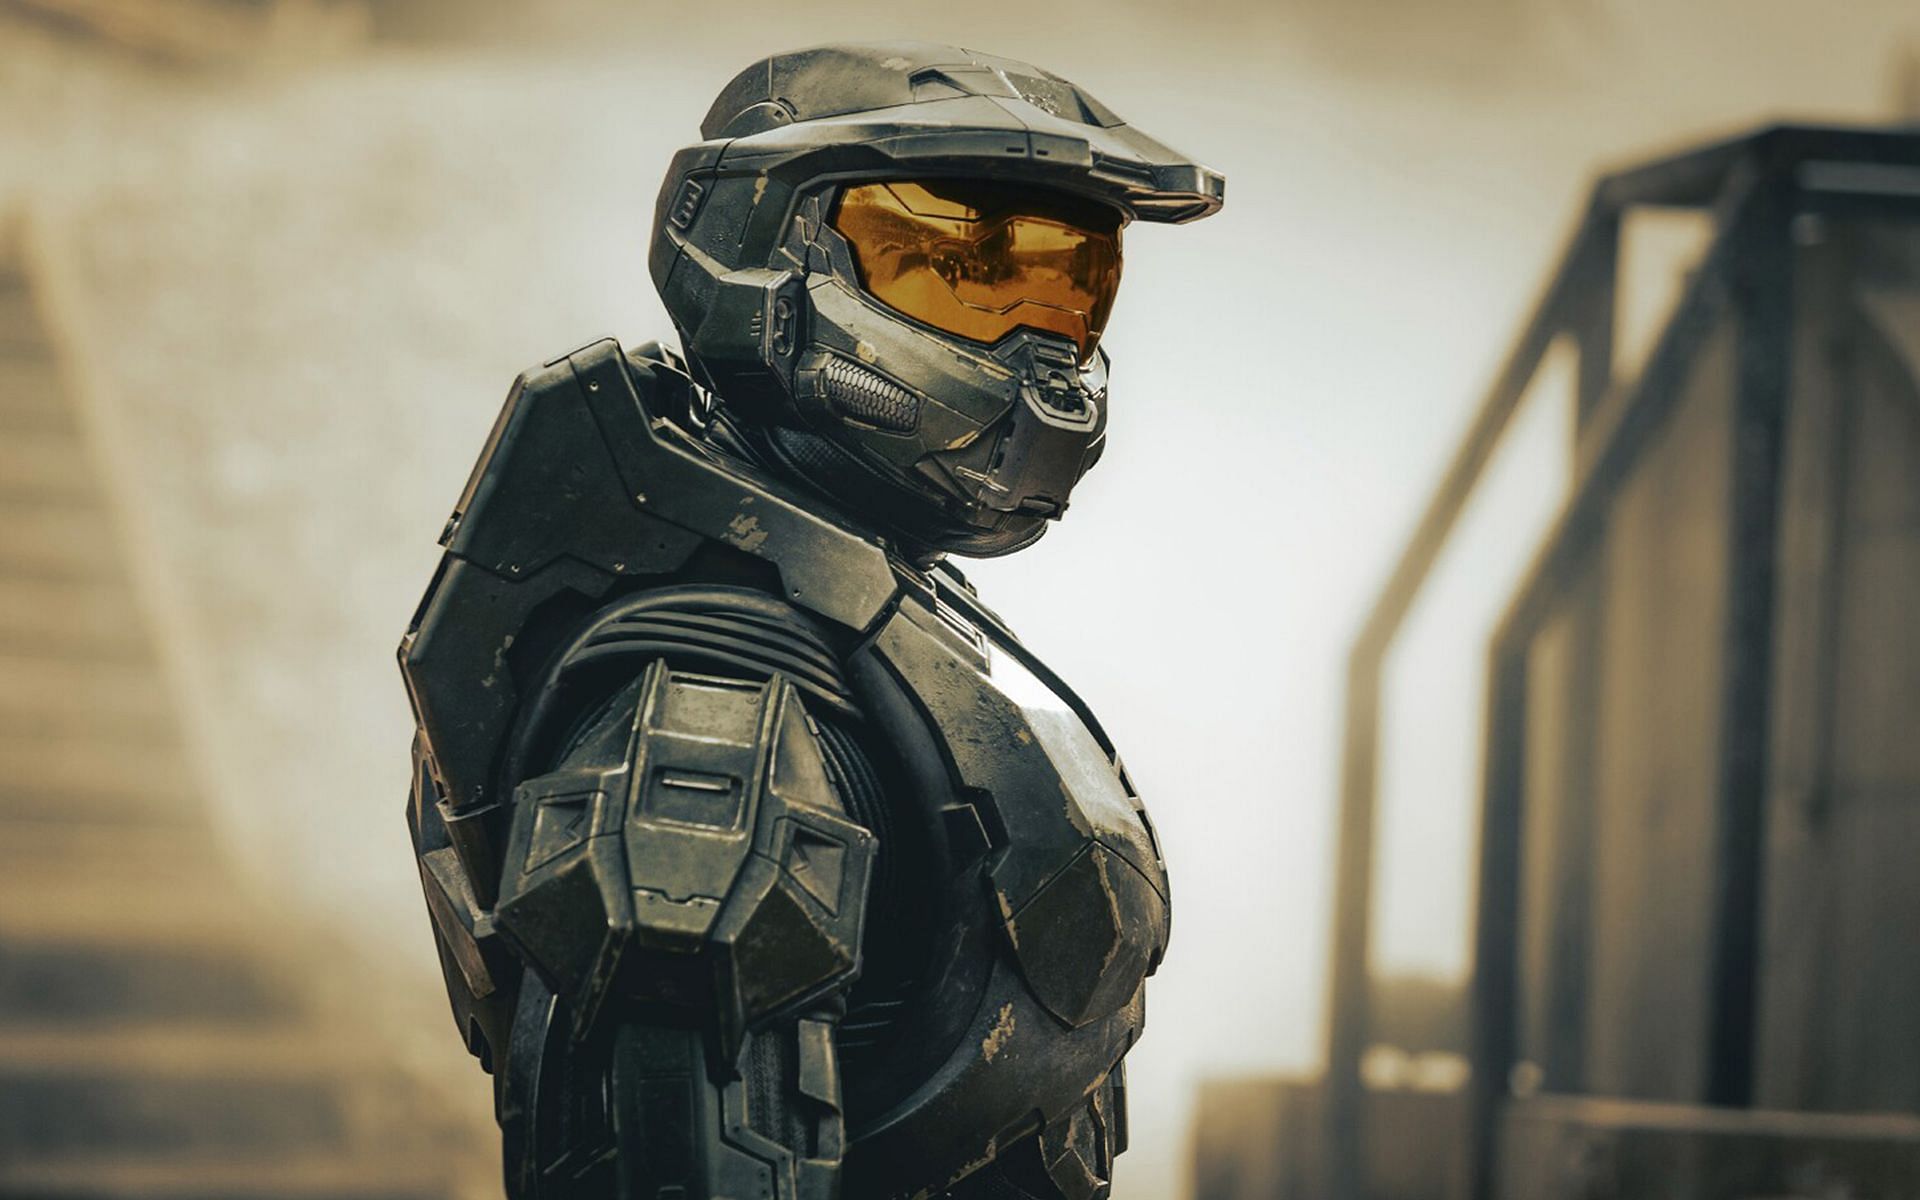 Episode 6 of Halo, will be released Thursday, April 28, 2022, at 12.00 am PST/03.00 am EST on Paramount+. (Image via IMDb)